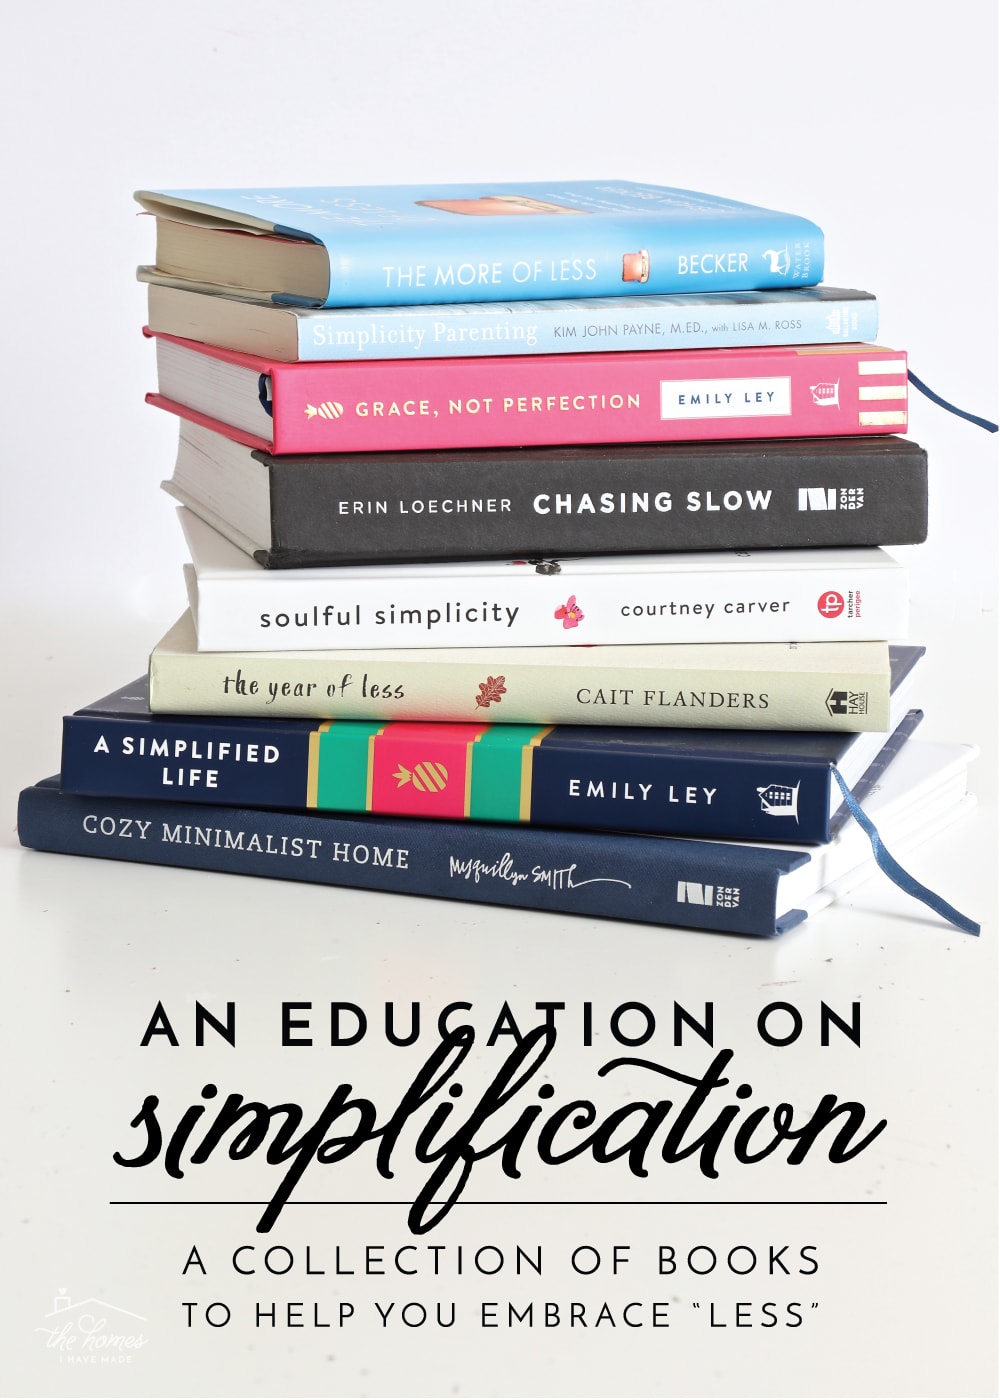 Ready to really declutter your home? Get motivated and learn how with these books on simplifying!